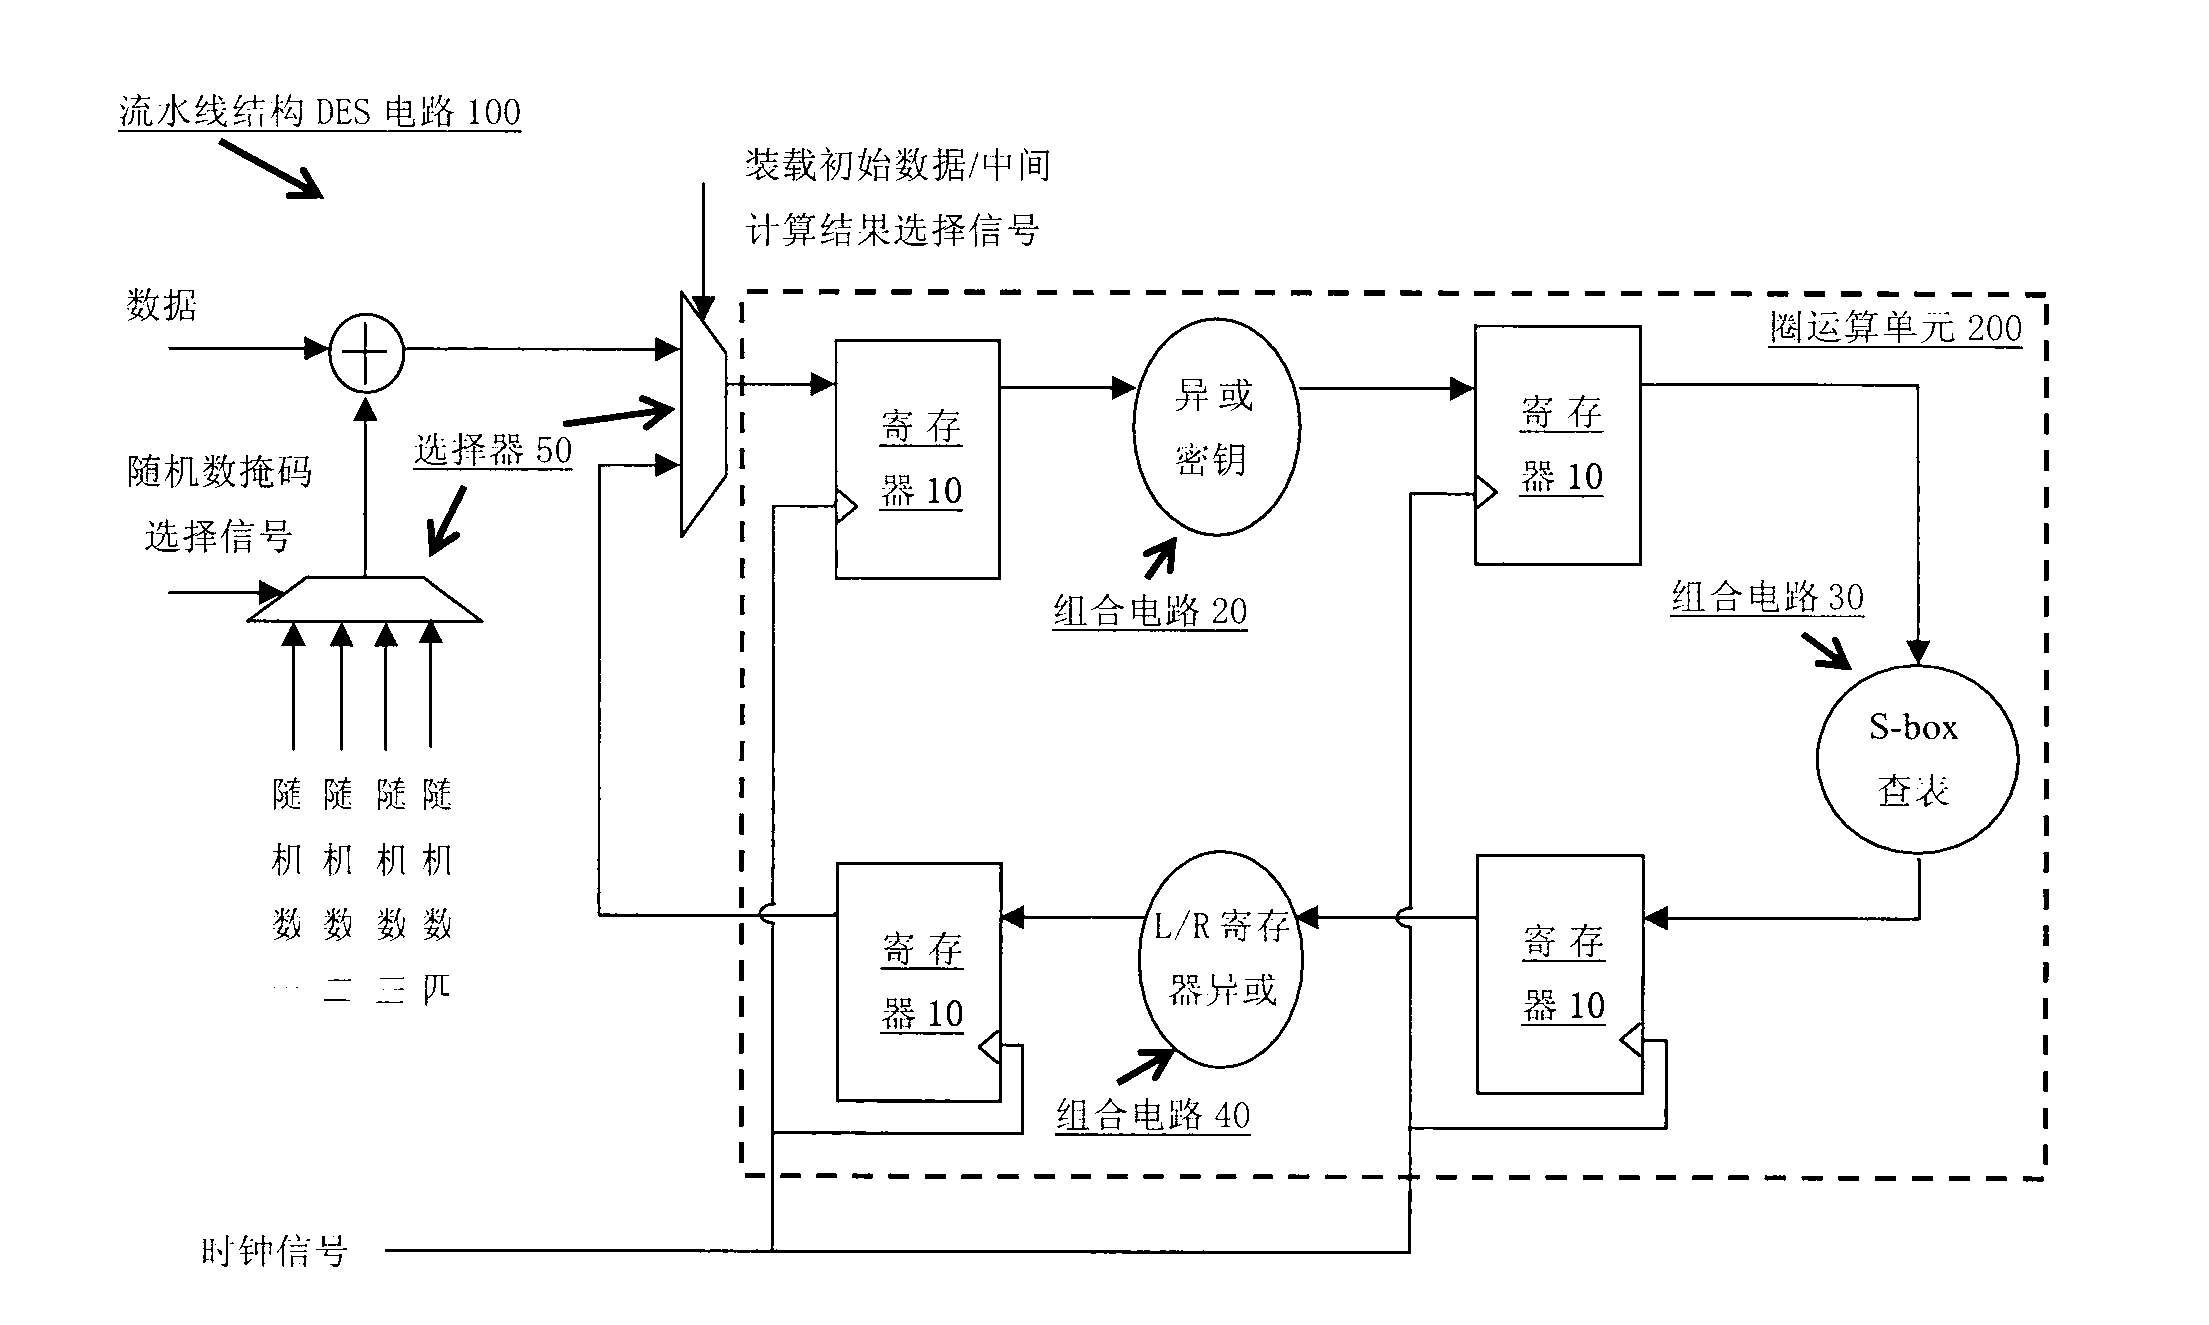 Circuit structure for preventing power attacks on grouping algorithm